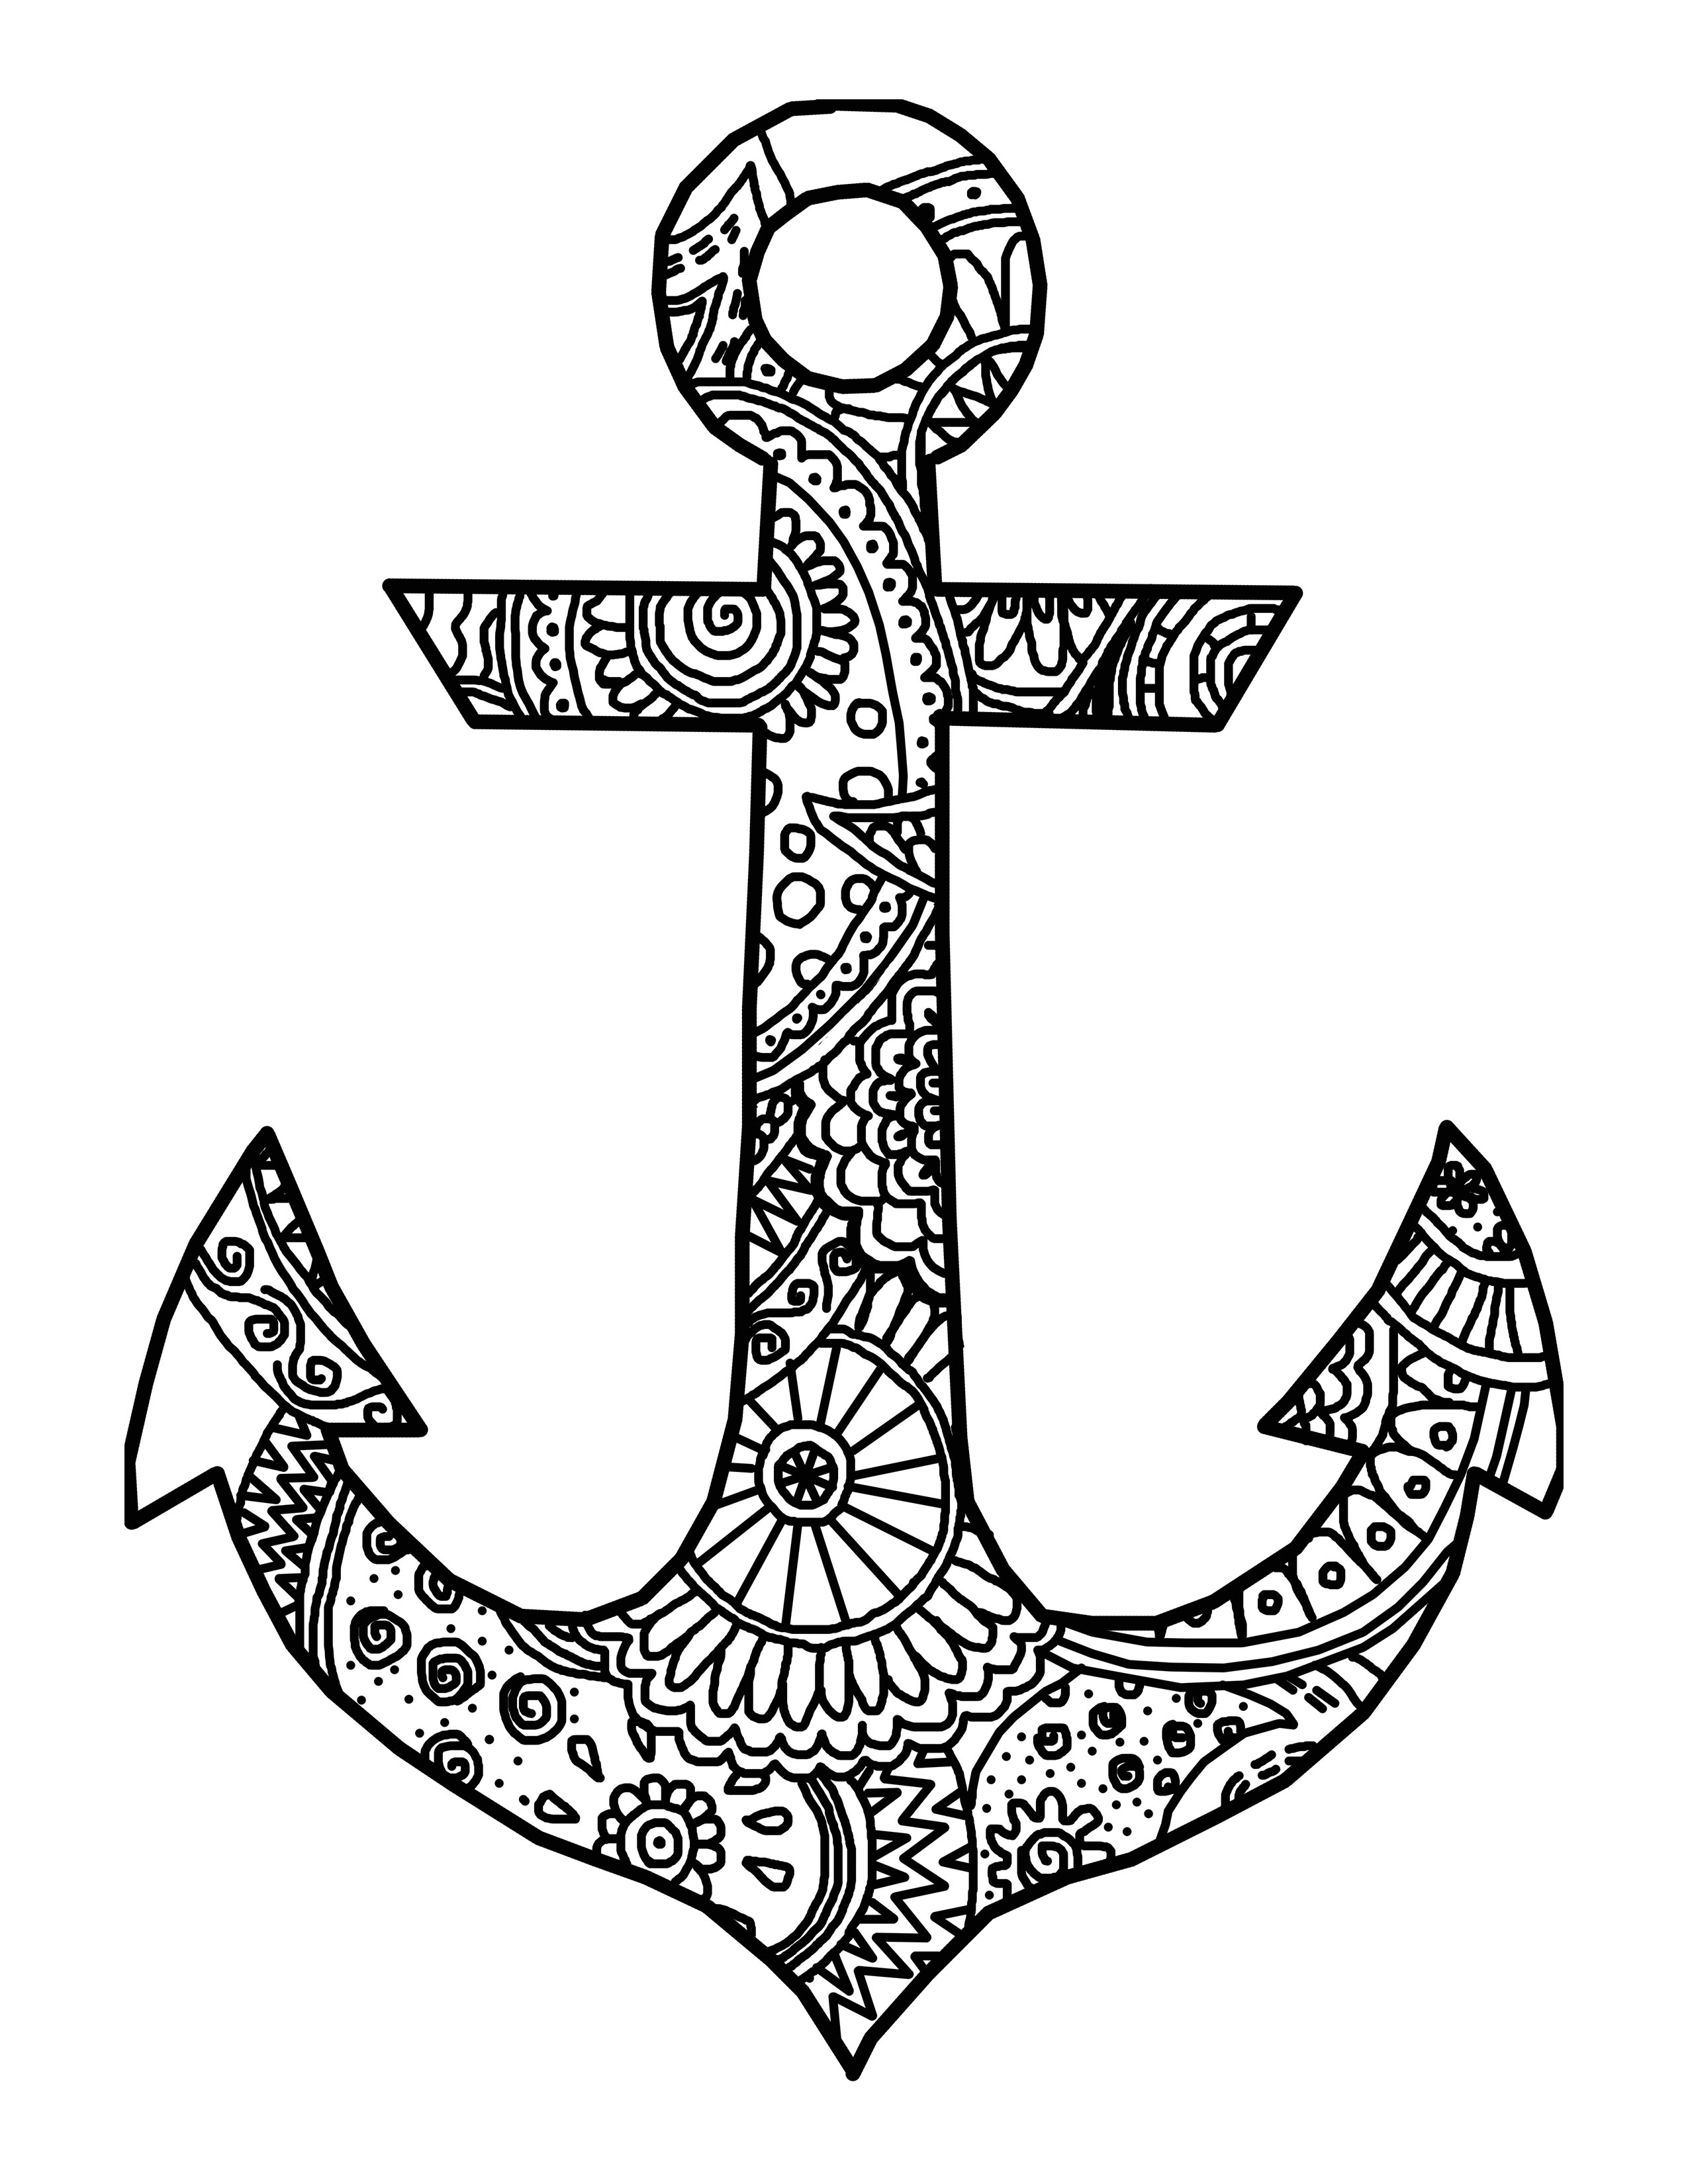 Anchor Coloring Page at GetColorings.com | Free printable colorings